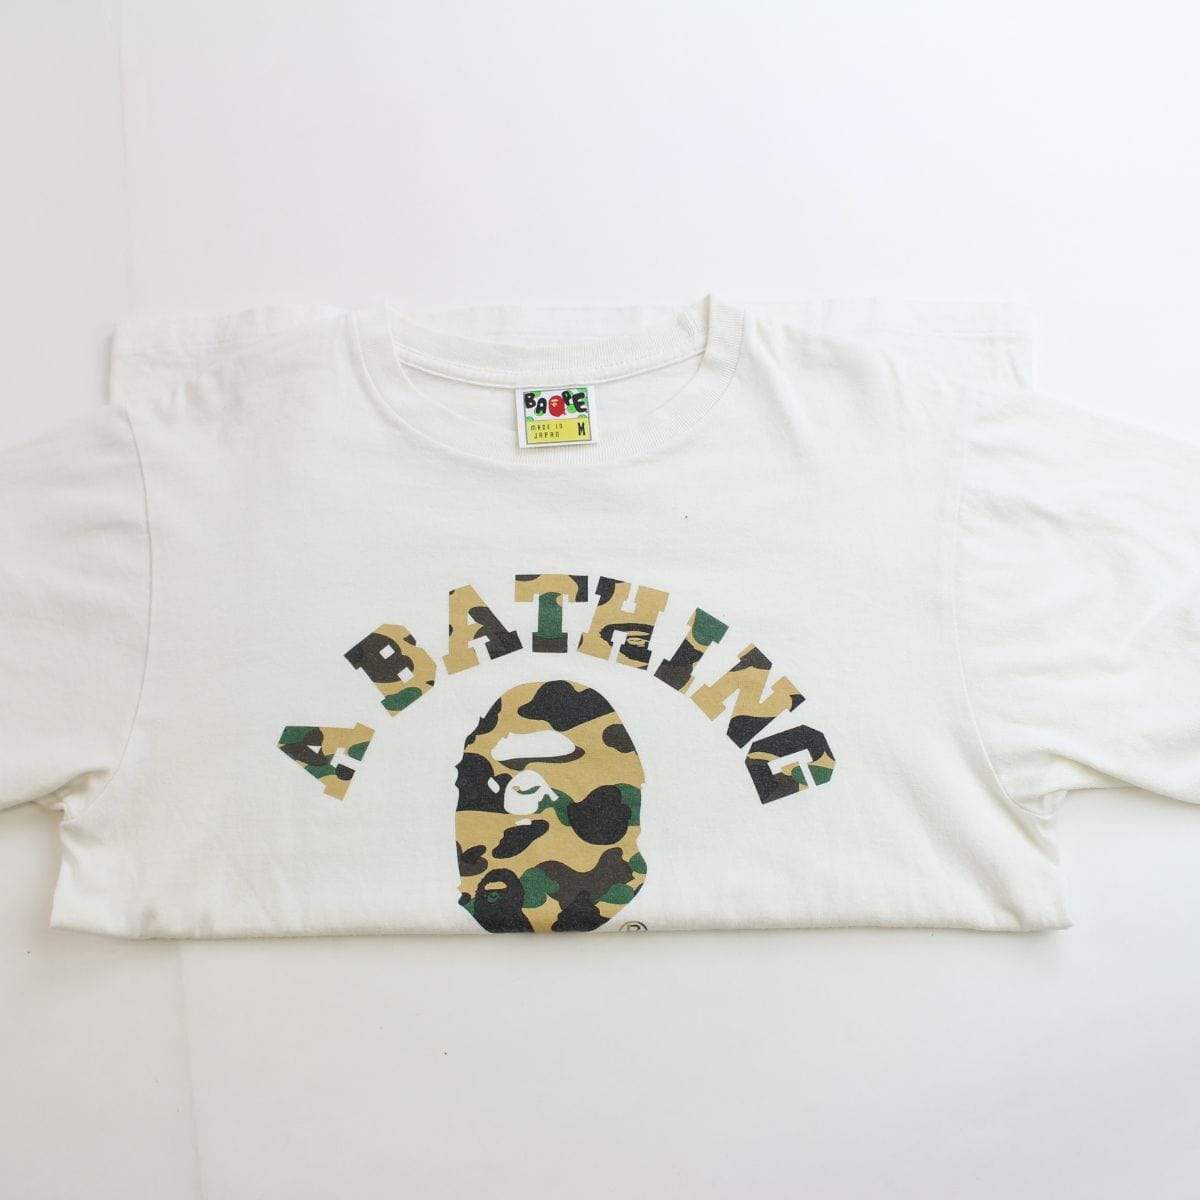 Bape Waterfall & 1st yellow college logos & much more, bundle steal - SaruGeneral